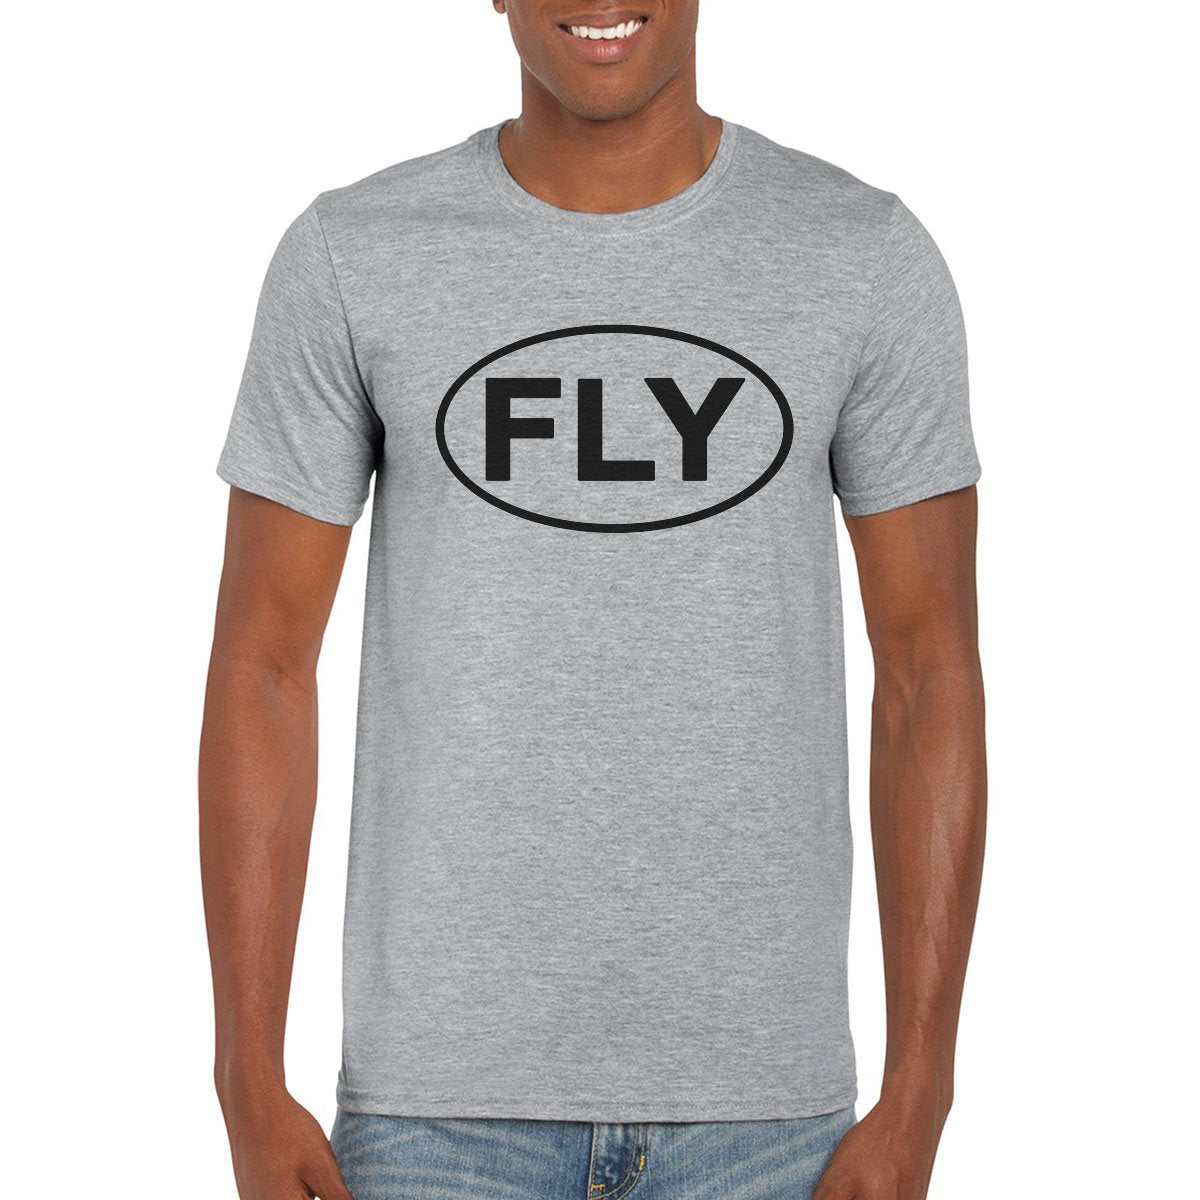 FLY Semi-Fitted Unisex T-Shirt